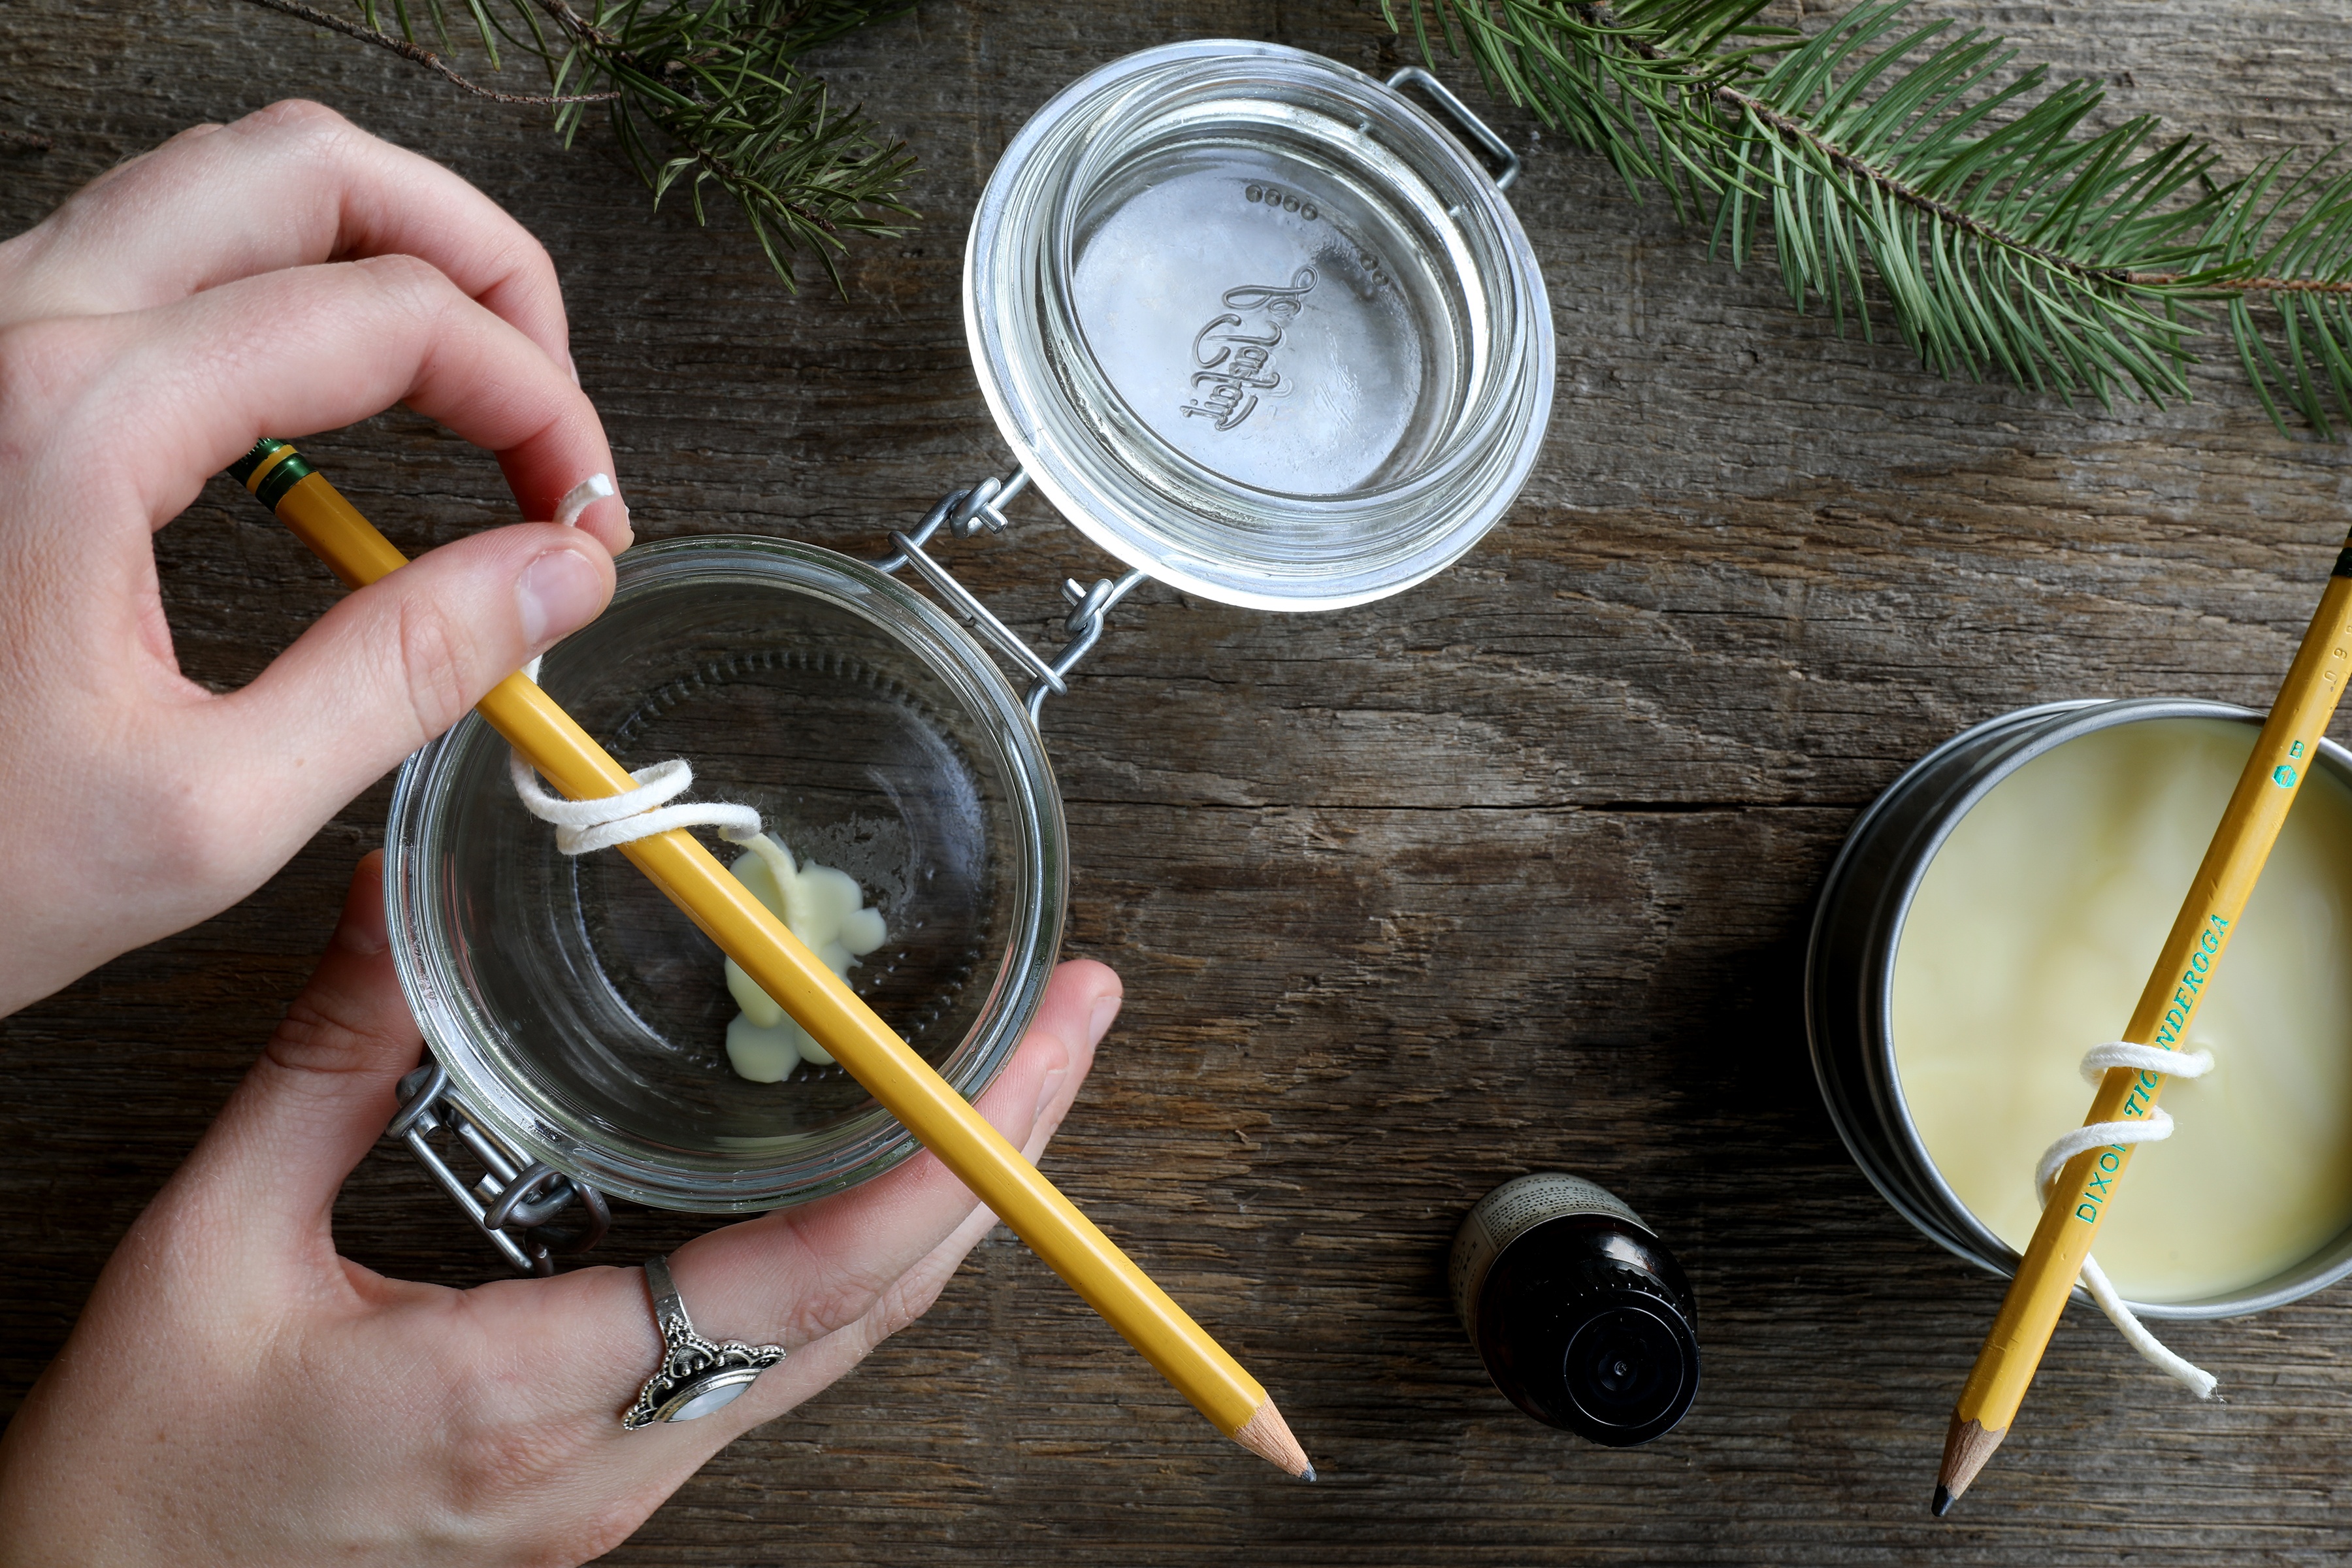 Build Your Own Candle Making Kit